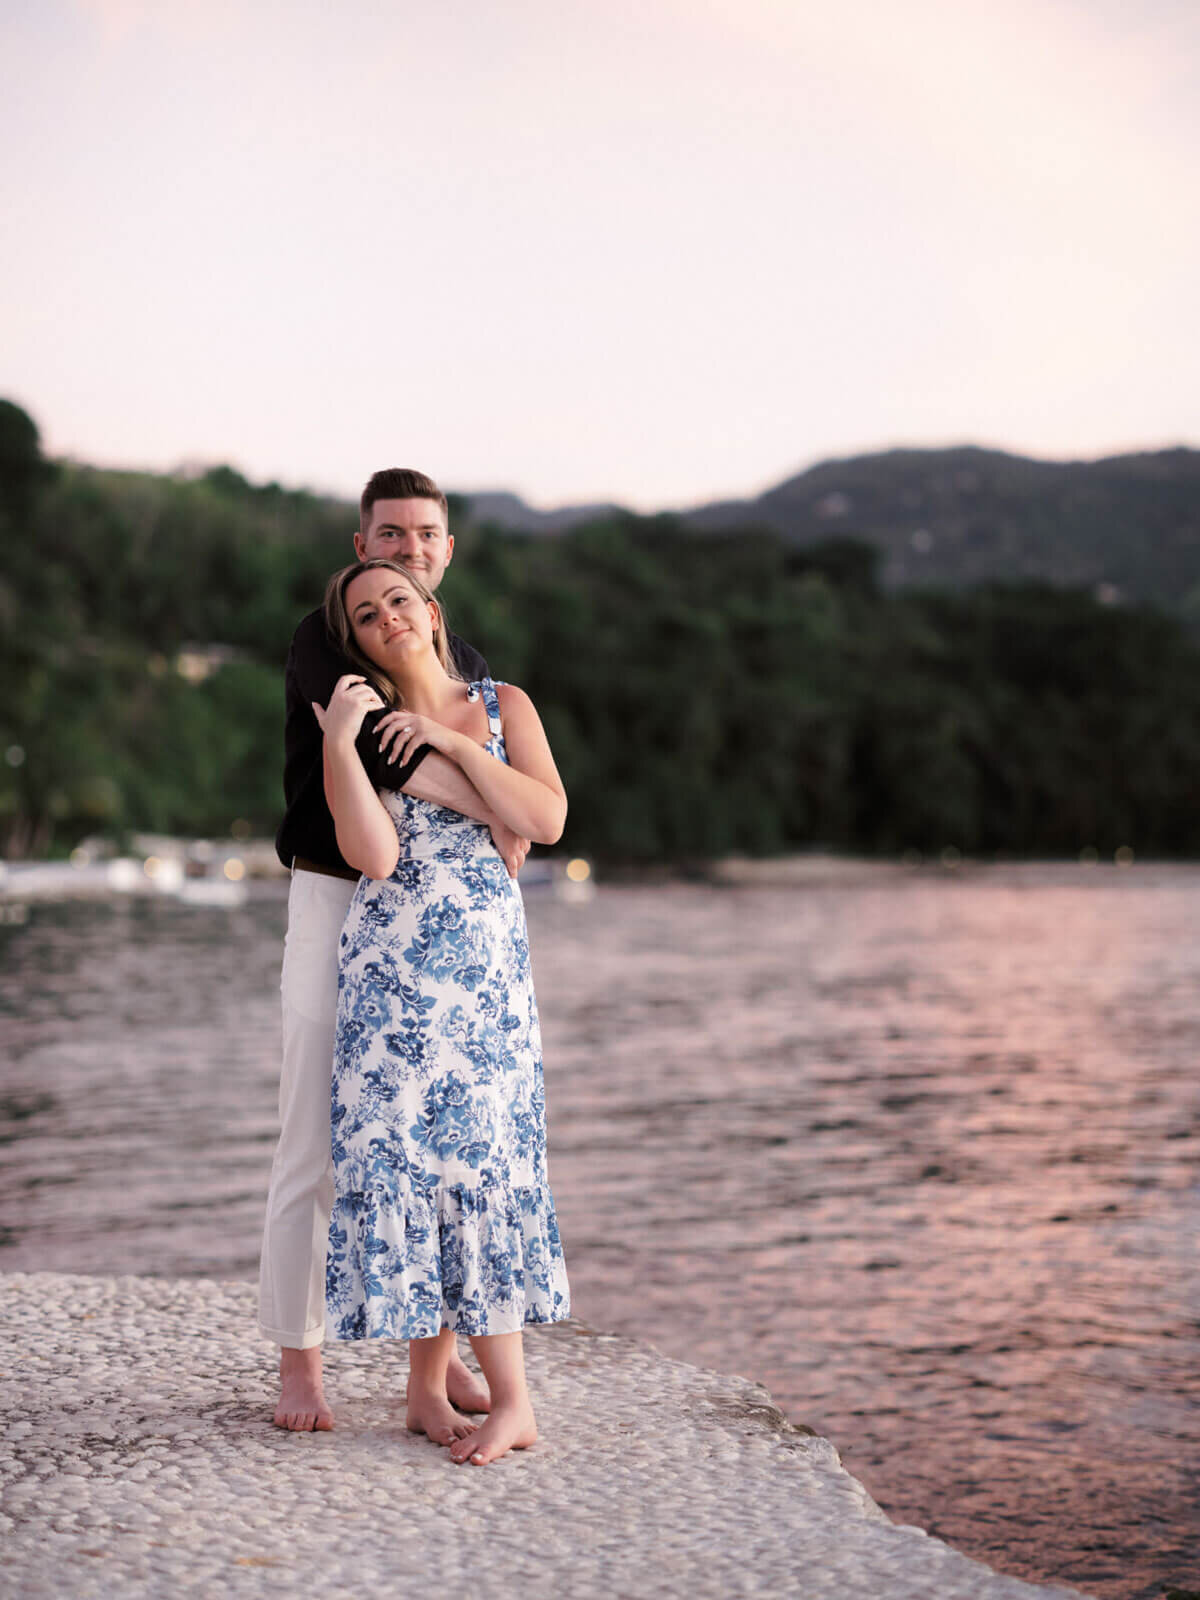 The engaged couple is standing on cobblestone ground at Roundhill Hotel and Villas, Jamaica, with the ocean on the background.